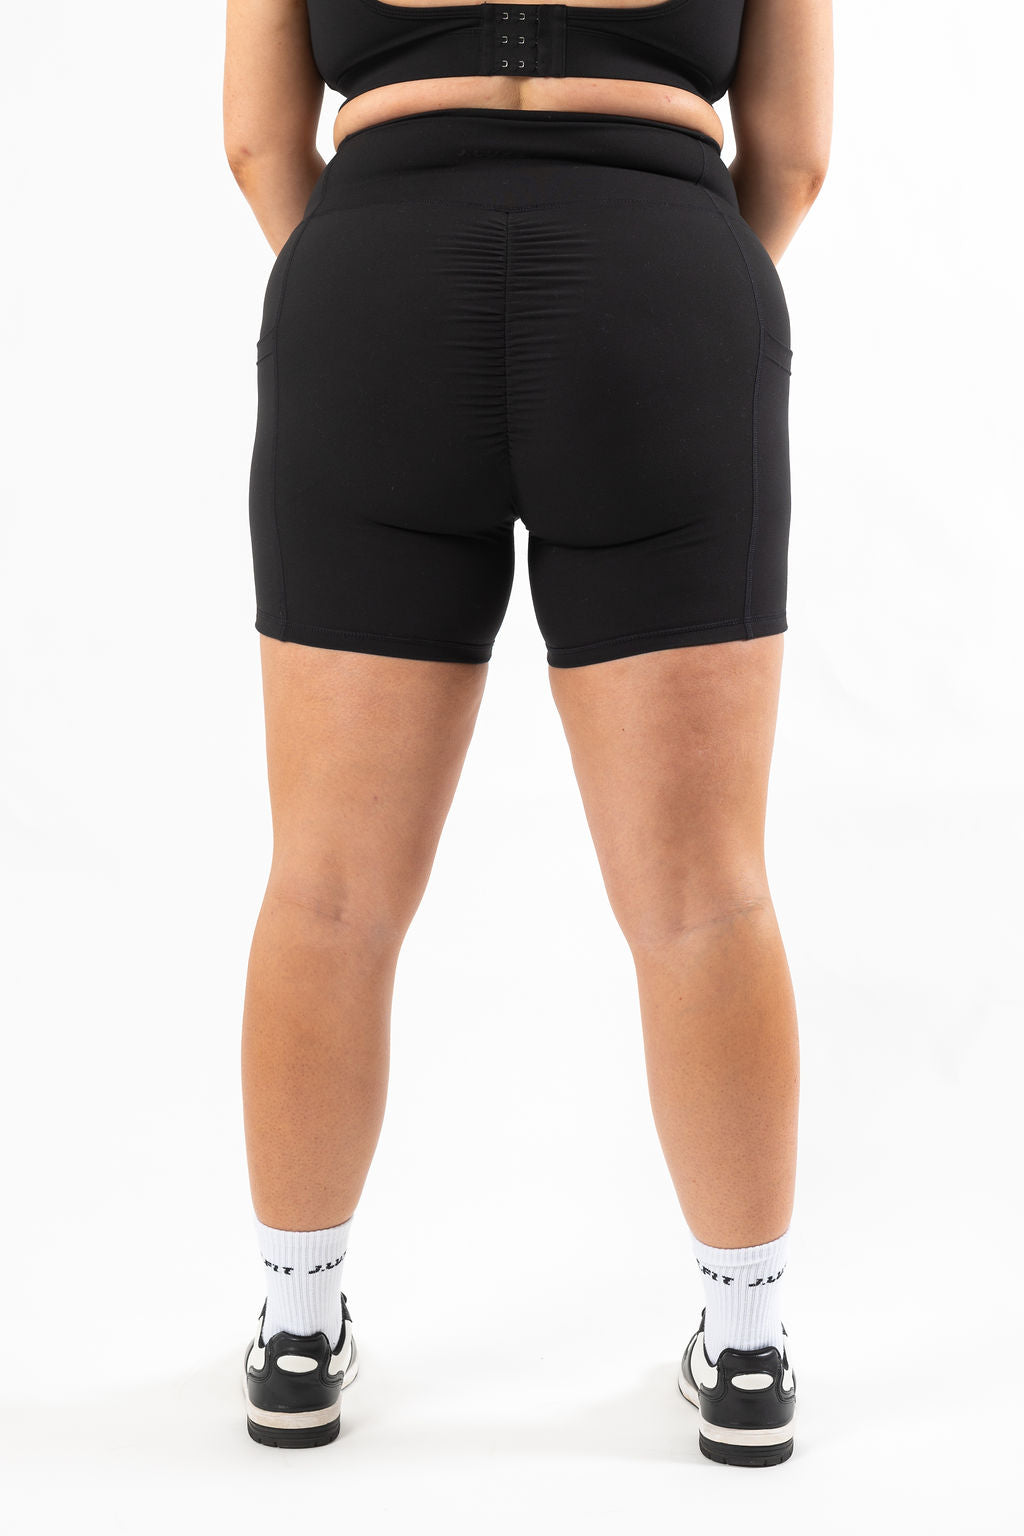 Core High Waisted Black Shorts With Pockets - J.LUXE.FIT